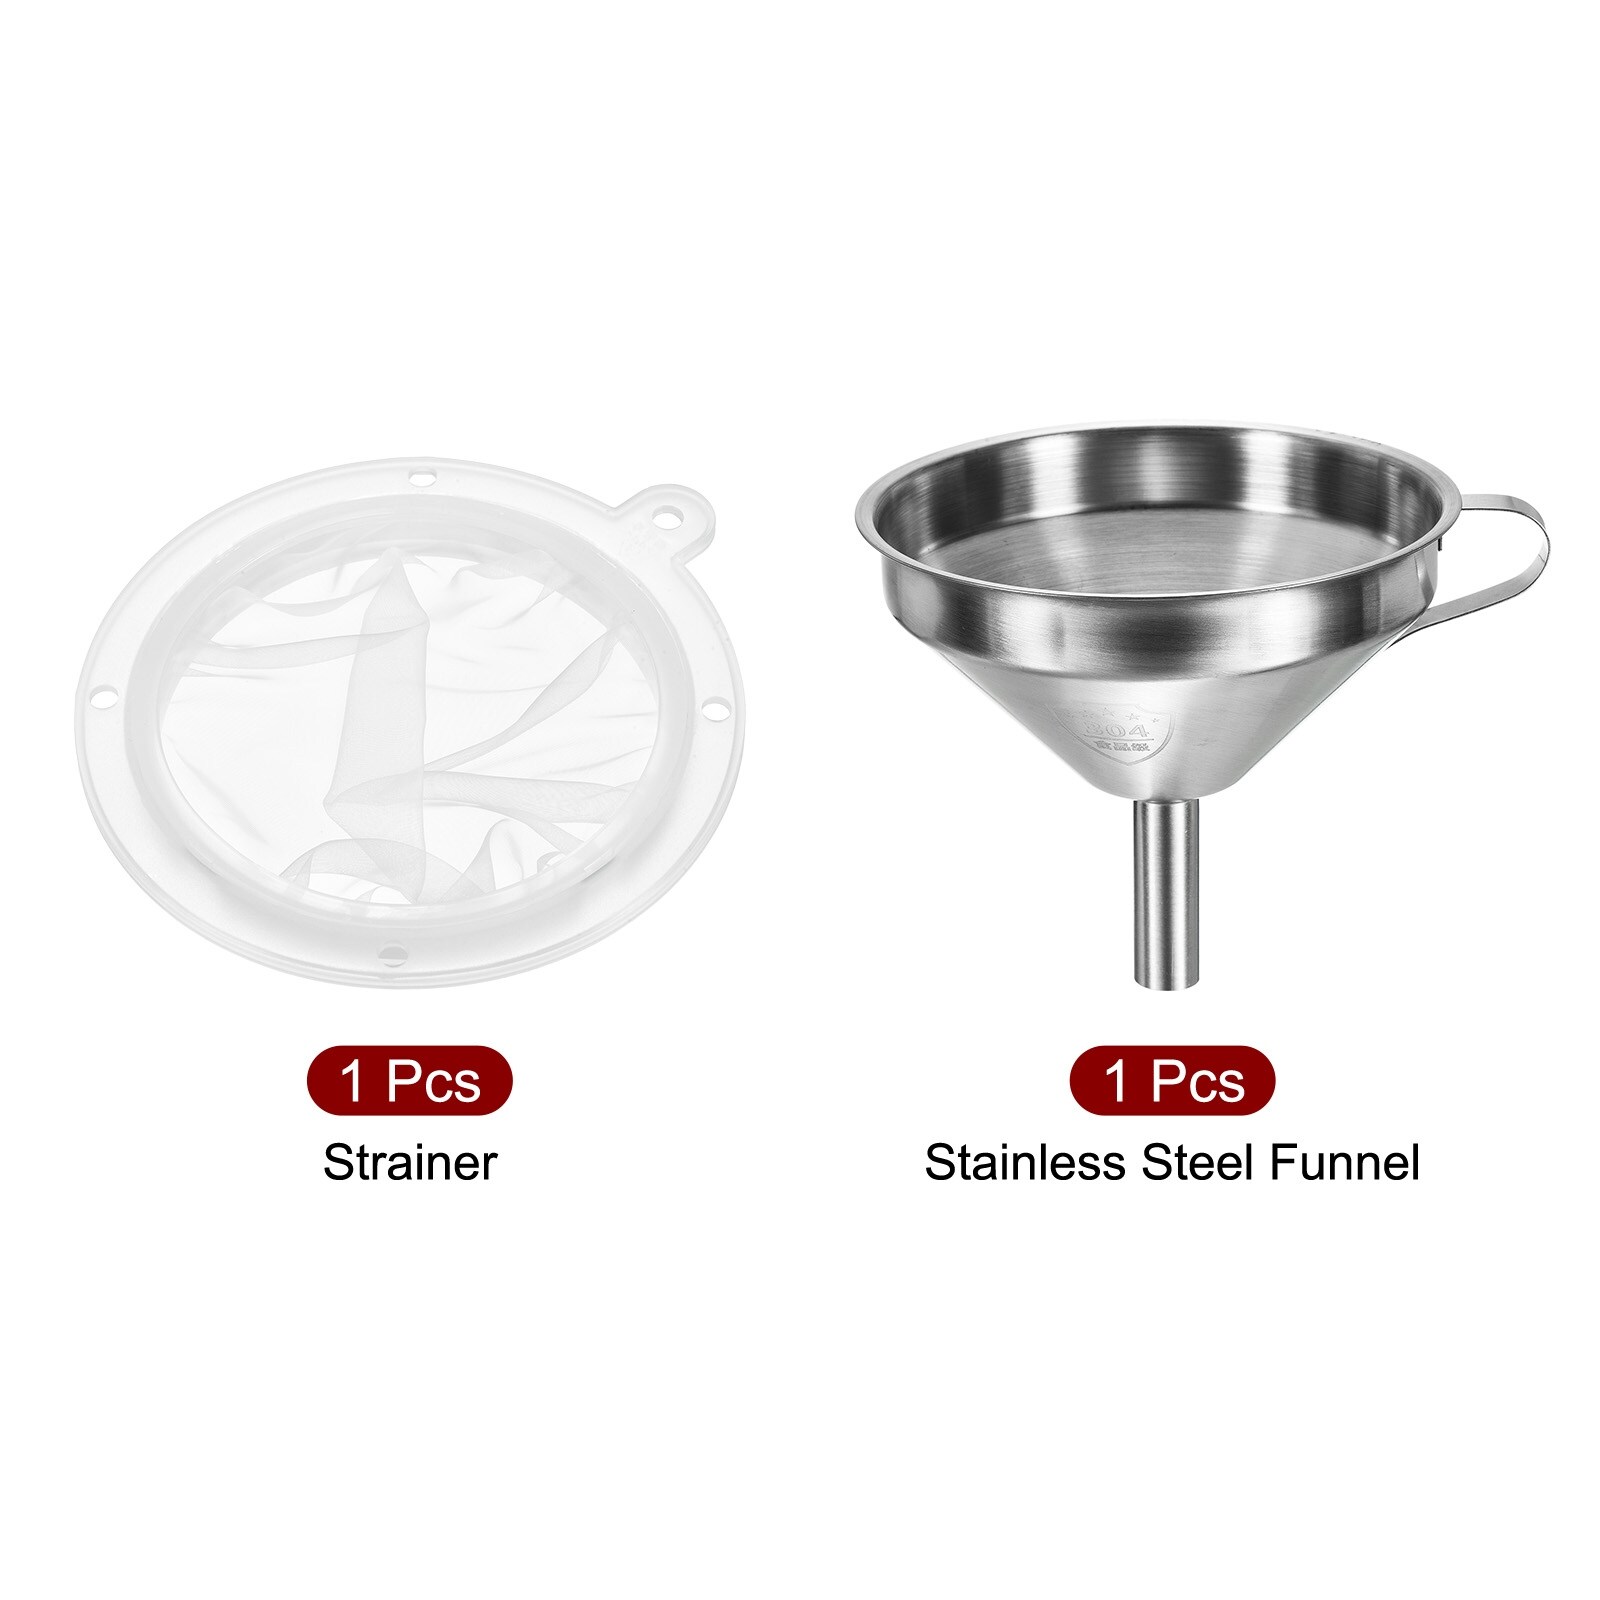 https://ak1.ostkcdn.com/images/products/is/images/direct/73df155c6c6776f8b33c895224946424a975a911/5.1%22-Dia-Stainless-Steel-Kitchen-Funnel-with-100-Mesh-Strainer-White-Silver-Tone.jpg